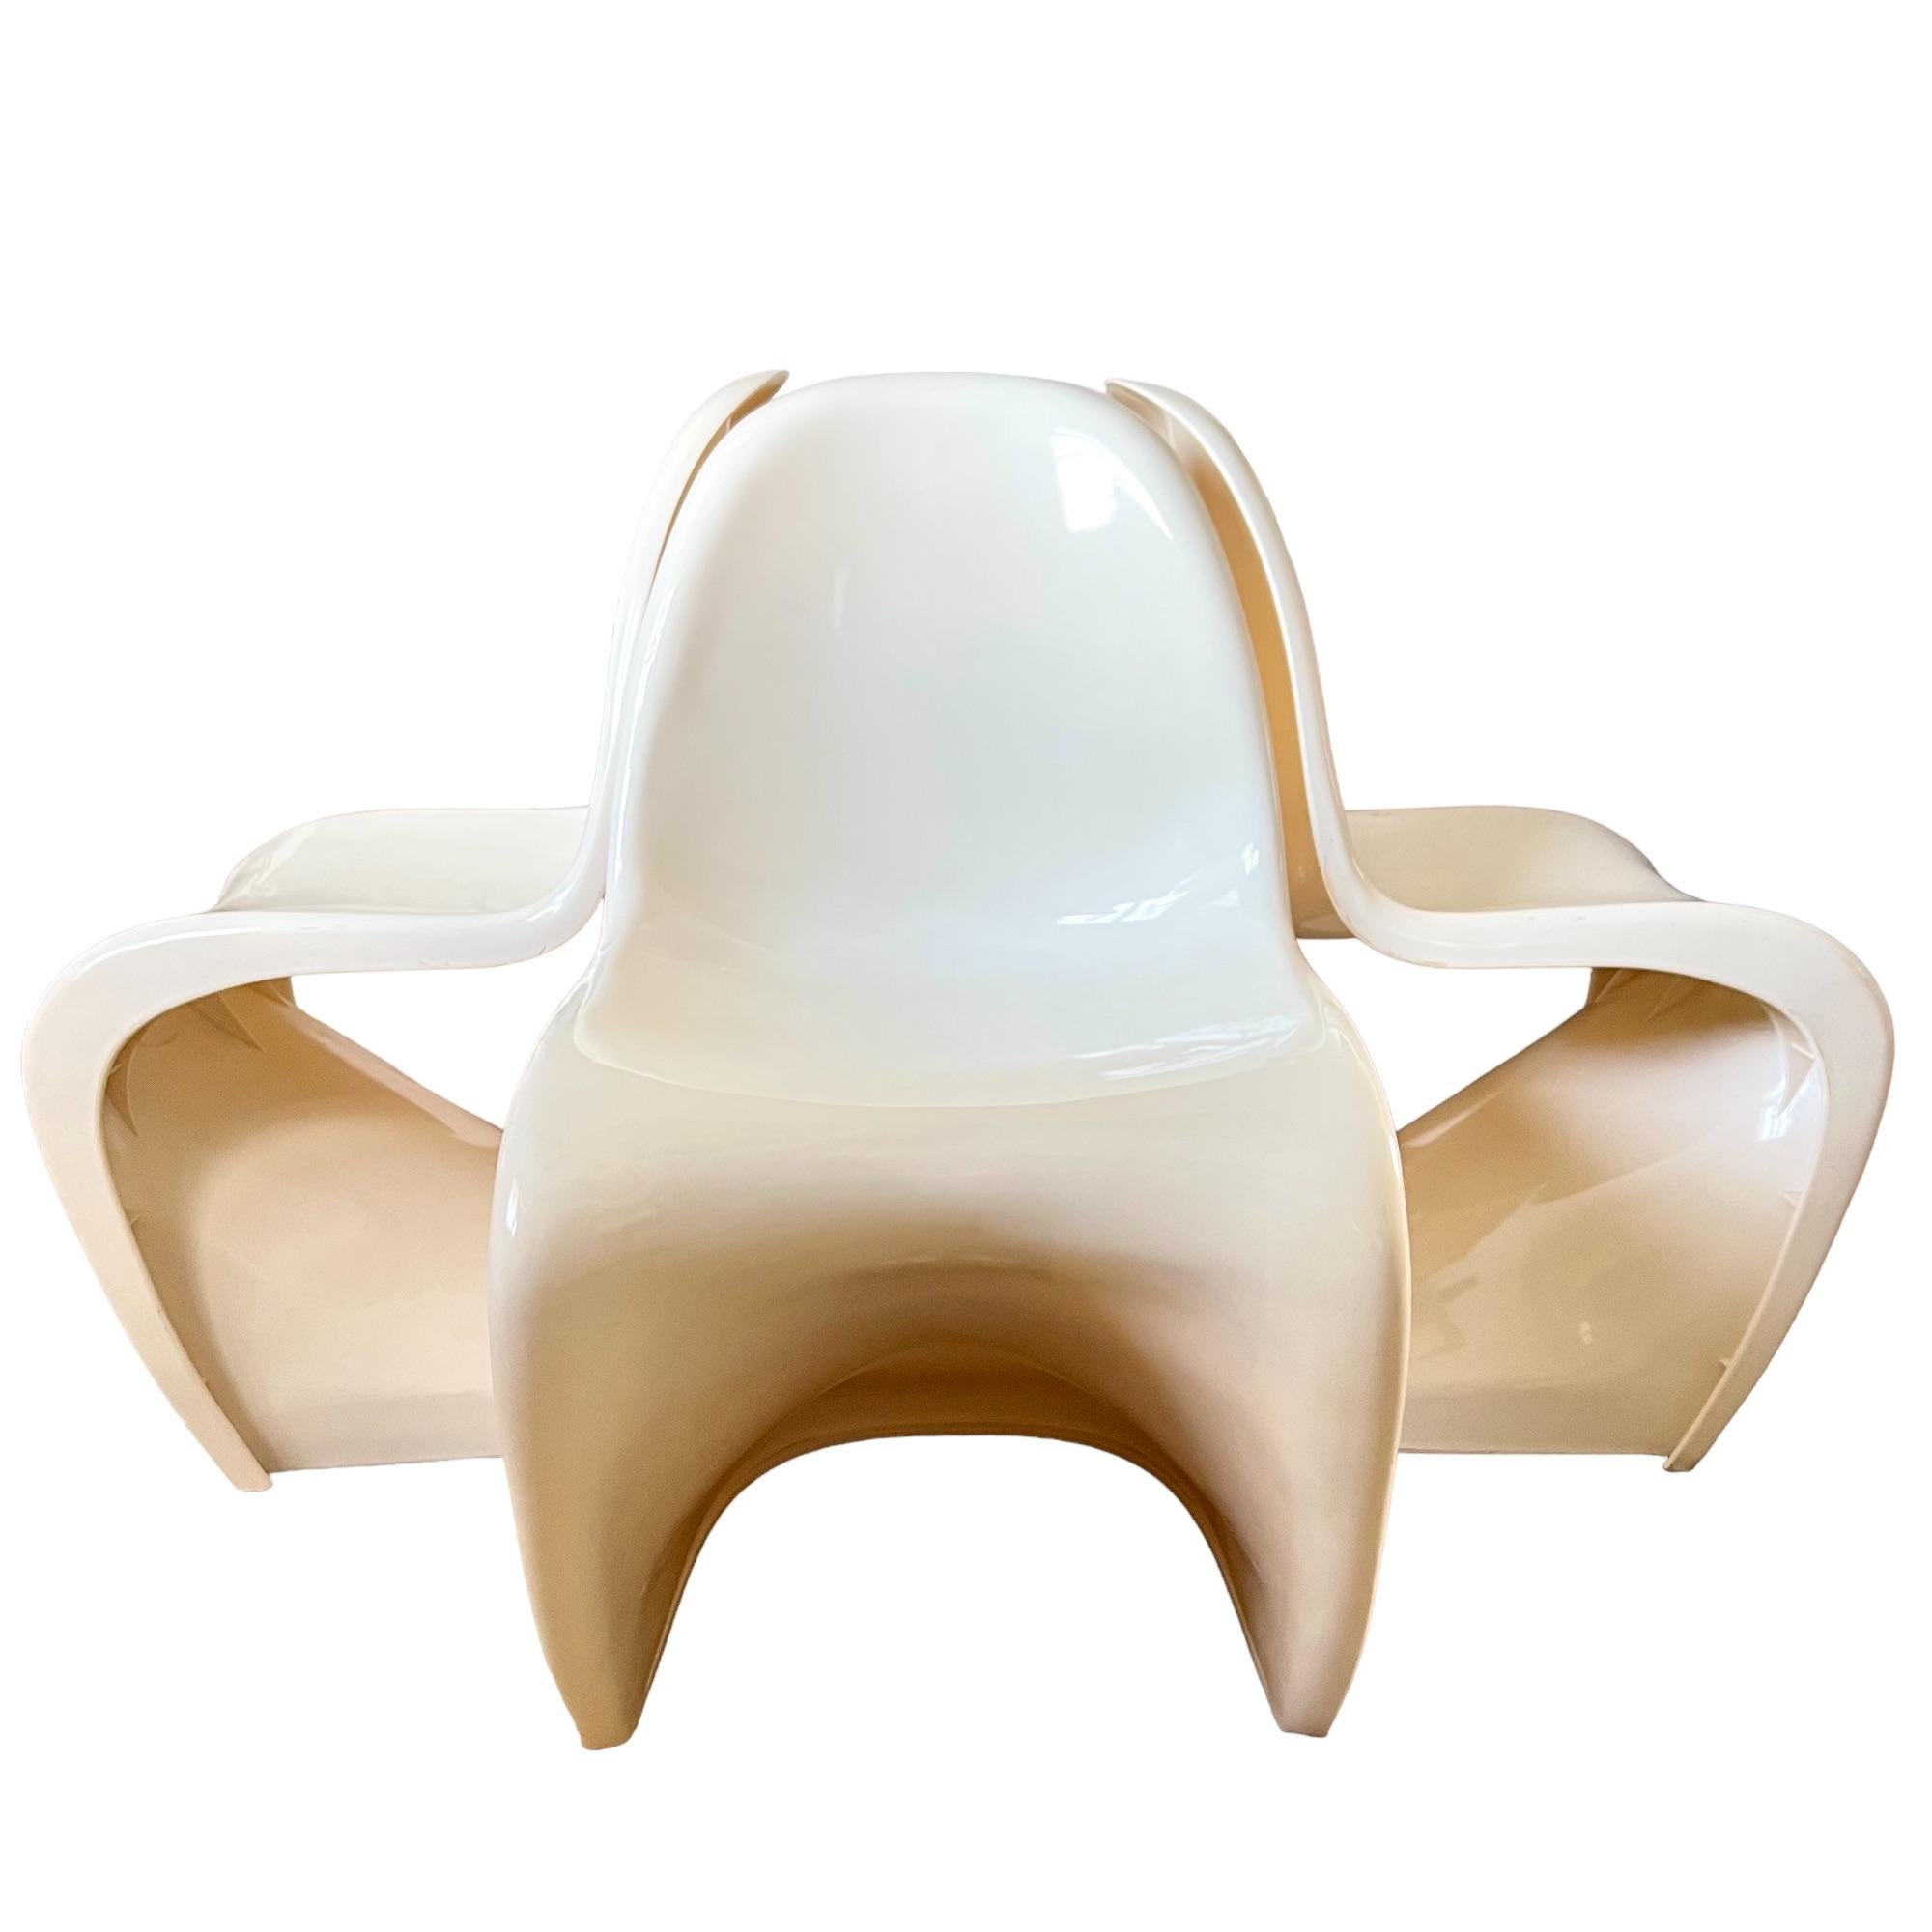 Molded Vintage Verner Panton Style Cream S Chairs, Set of 4